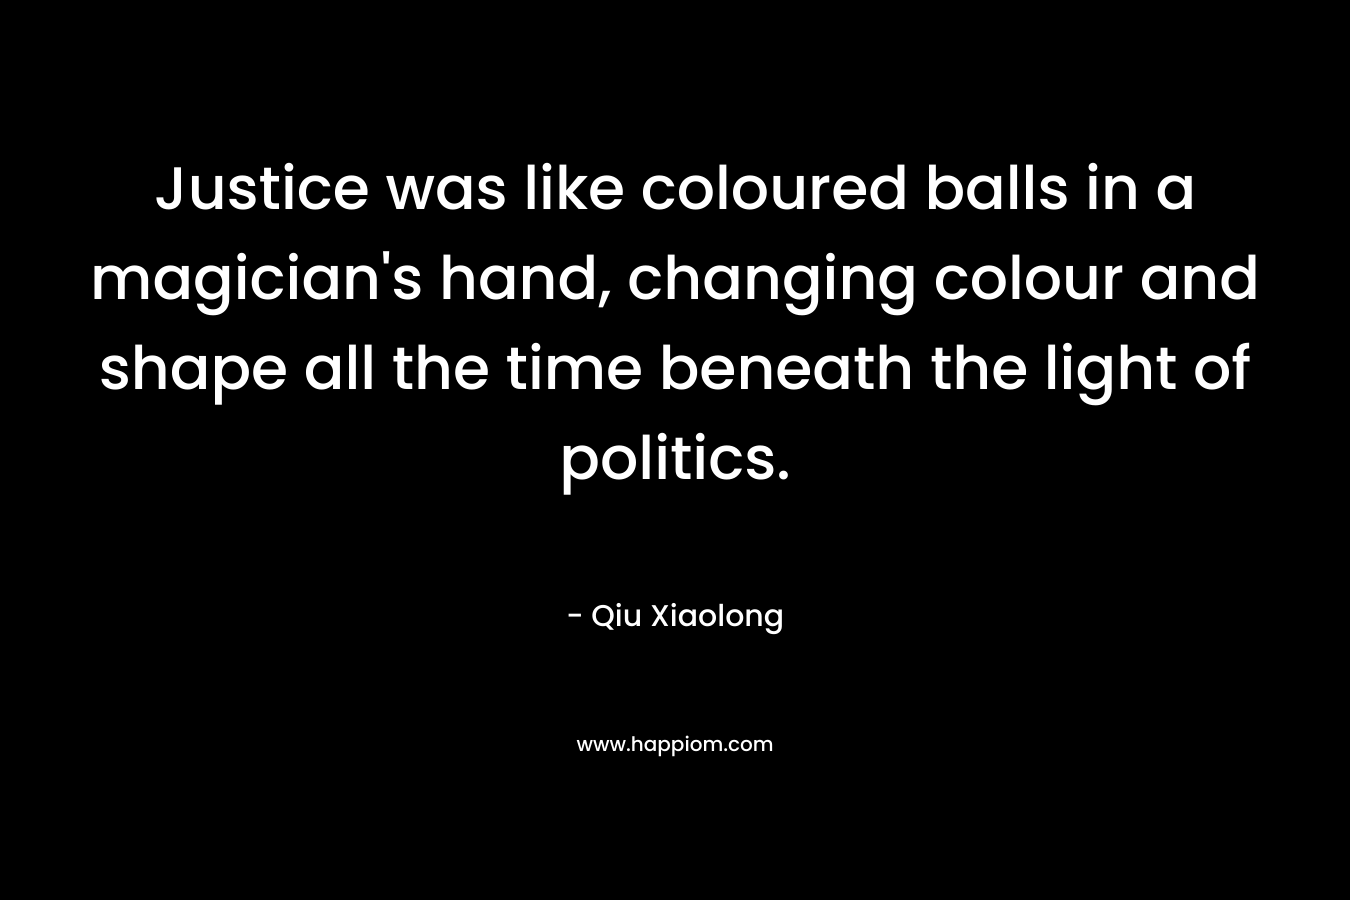 Justice was like coloured balls in a magician's hand, changing colour and shape all the time beneath the light of politics.